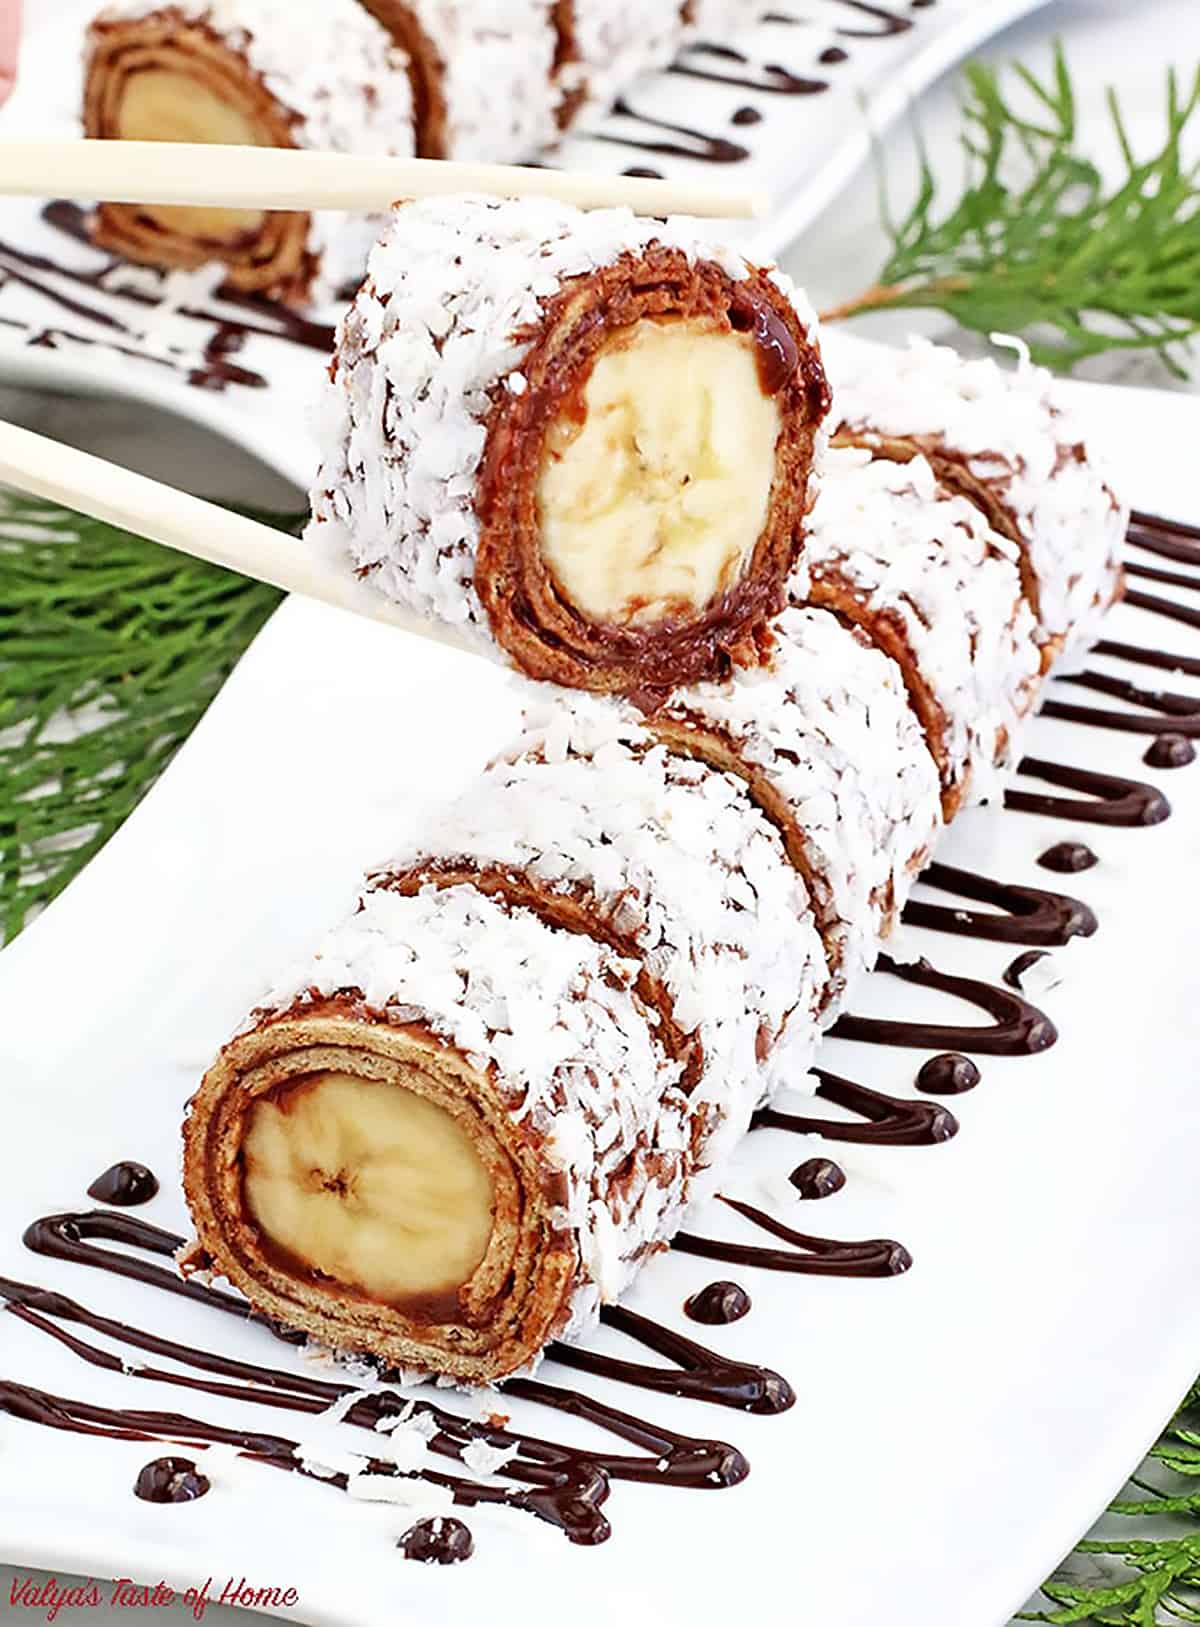 What can be better than sushi? Dessert sushi, folks! These Easy Banana Nutella Sushi Rolls require no baking and come together in no time!